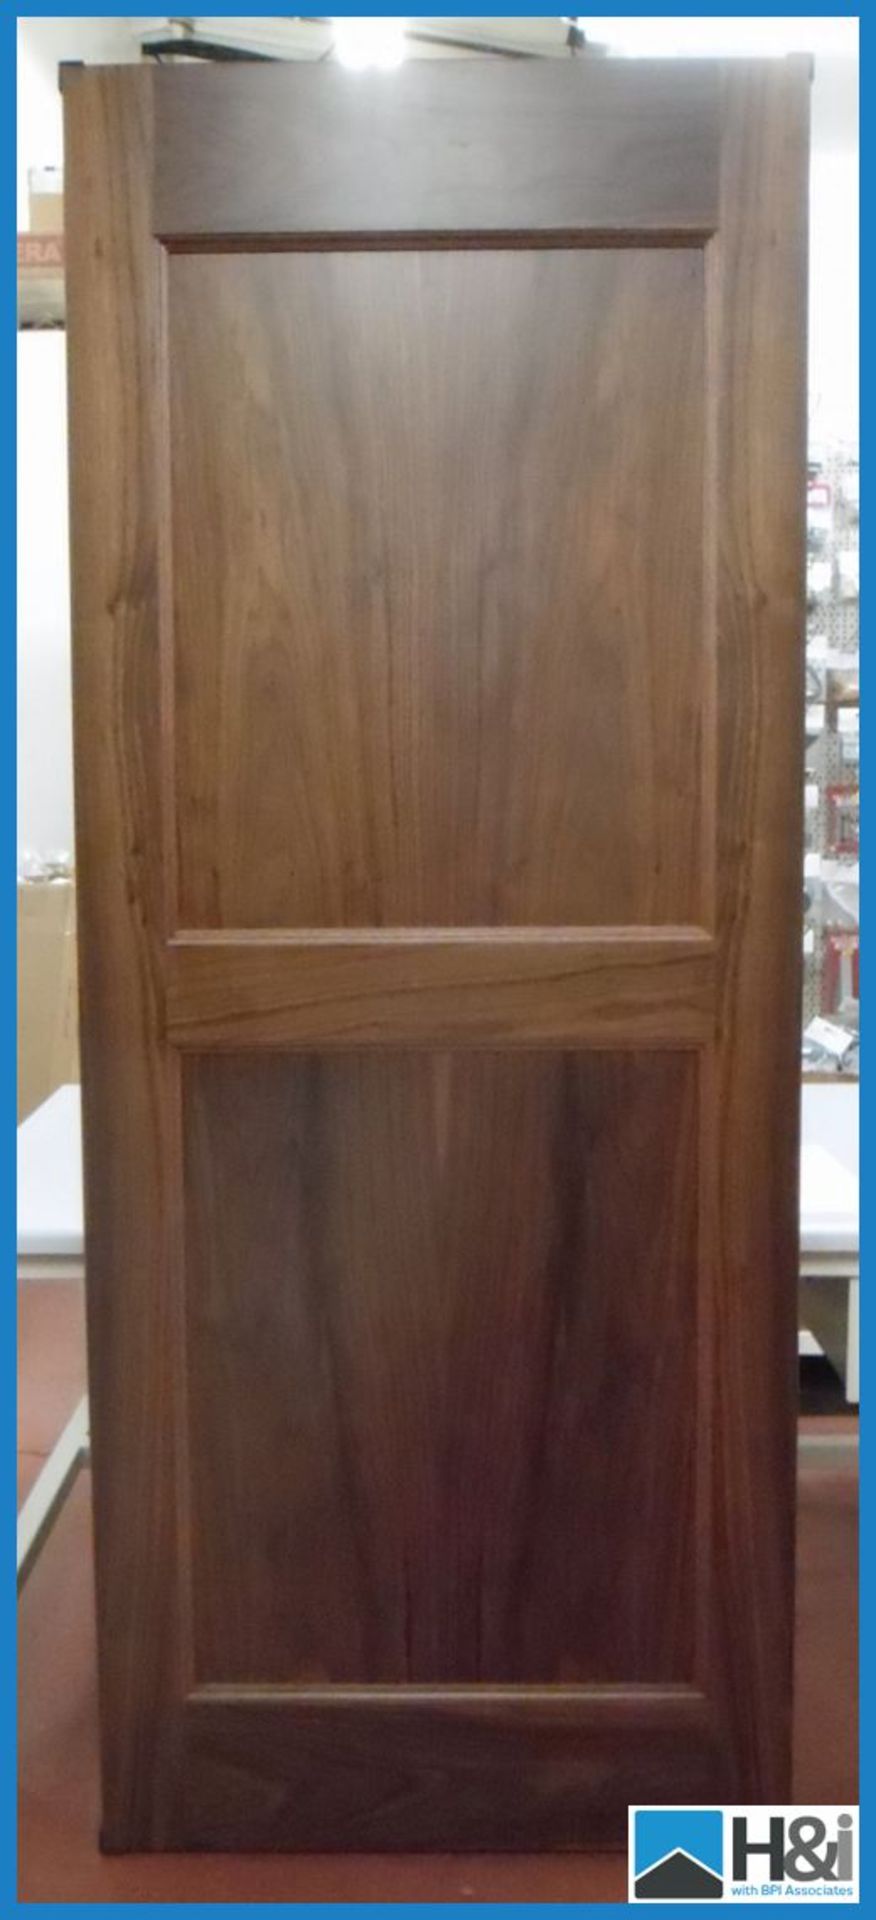 Brand new in sealed packaging Walnut 'Arden' exterior door 78" x 33" 44mm thickness with two flat